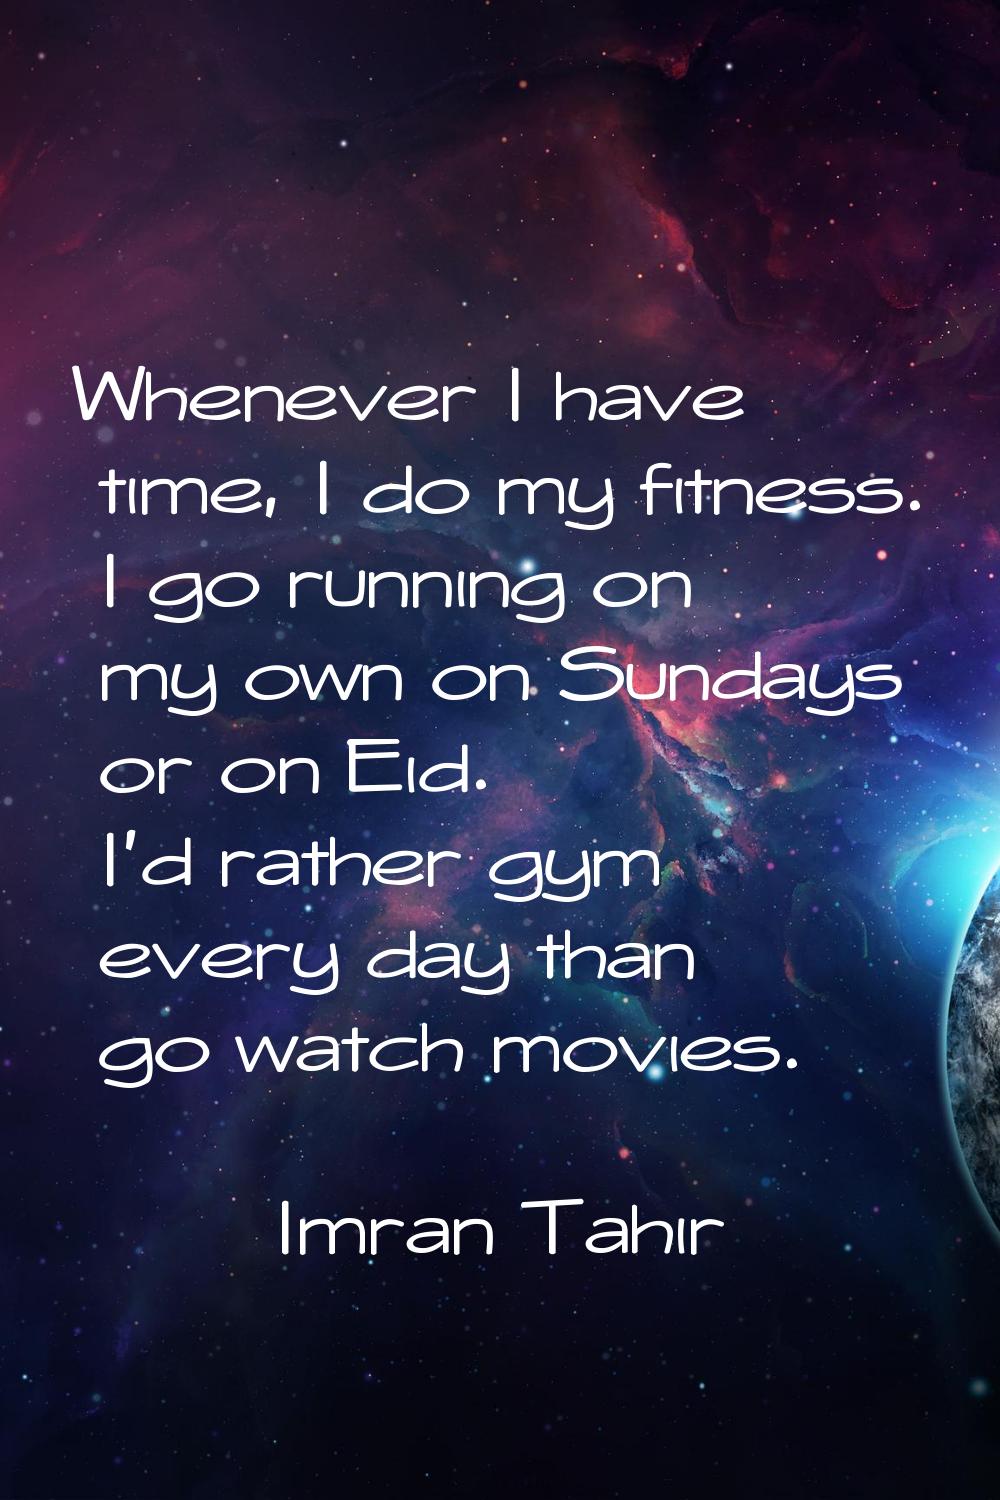 Whenever I have time, I do my fitness. I go running on my own on Sundays or on Eid. I'd rather gym 